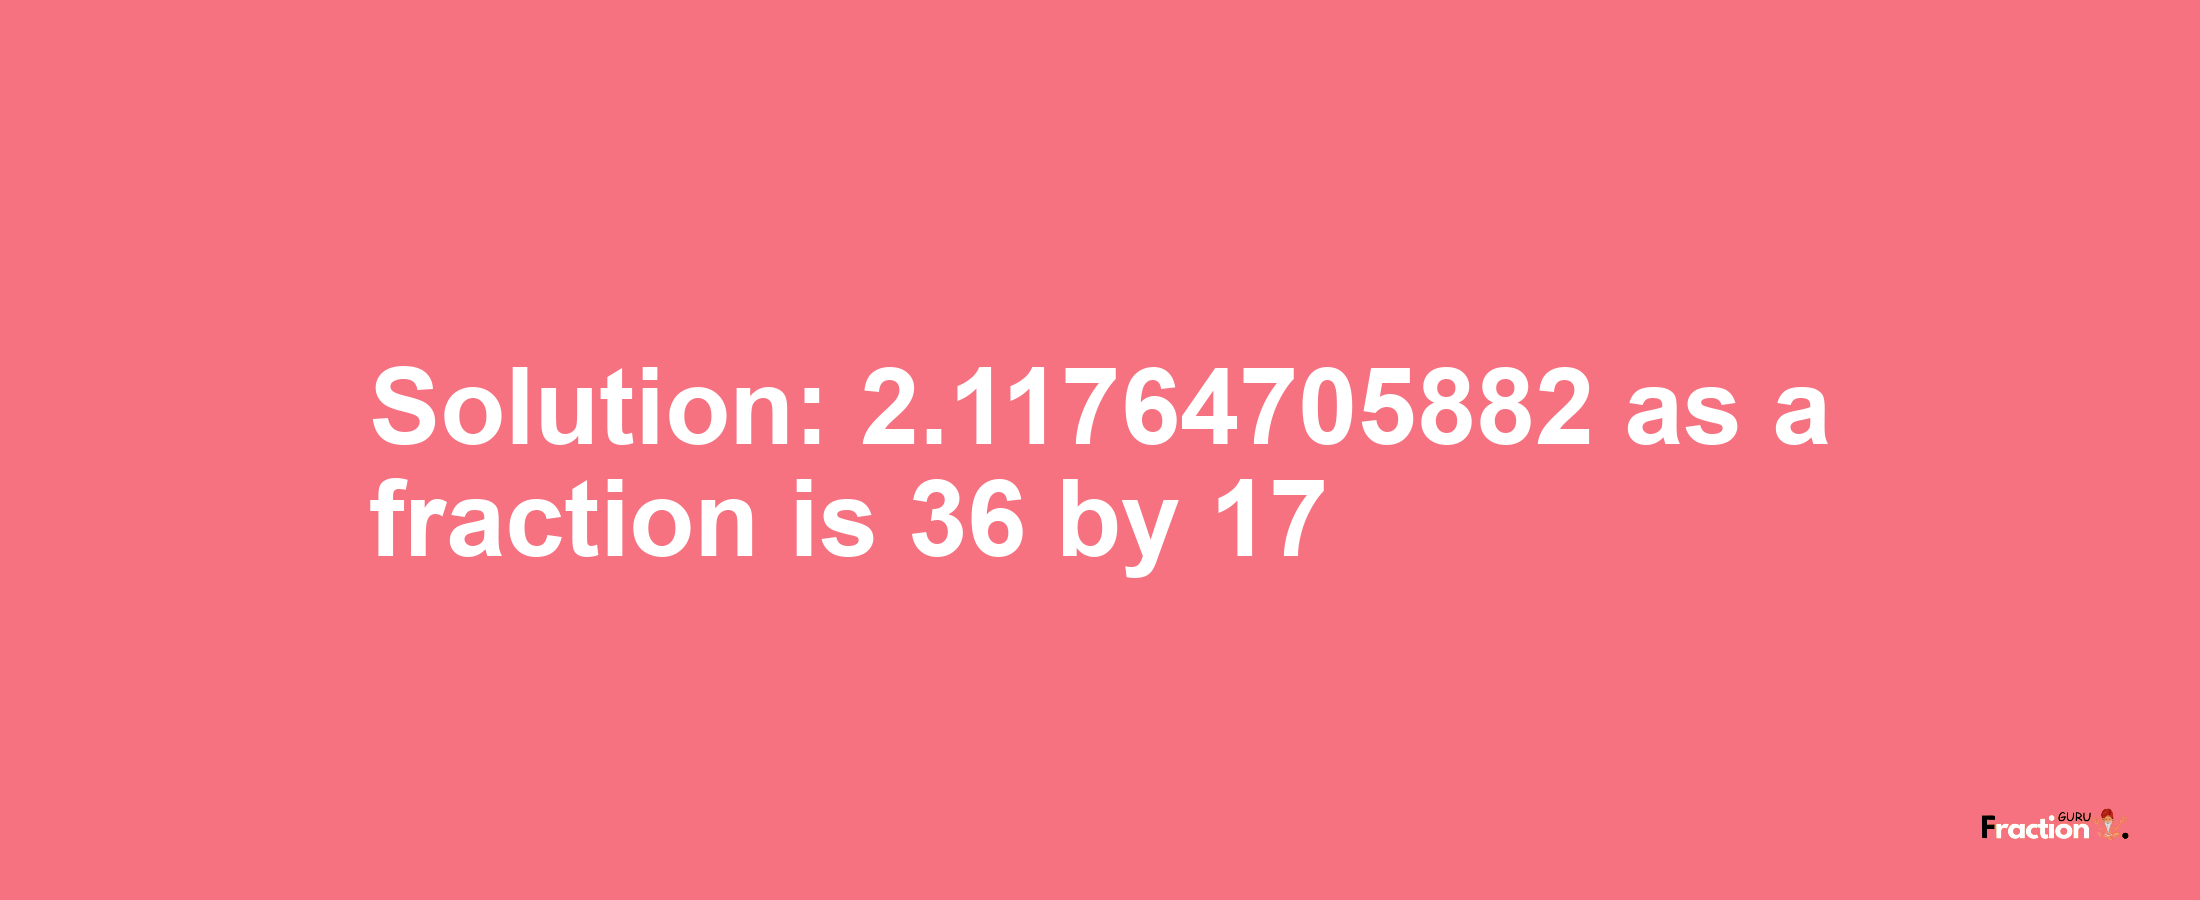 Solution:2.11764705882 as a fraction is 36/17